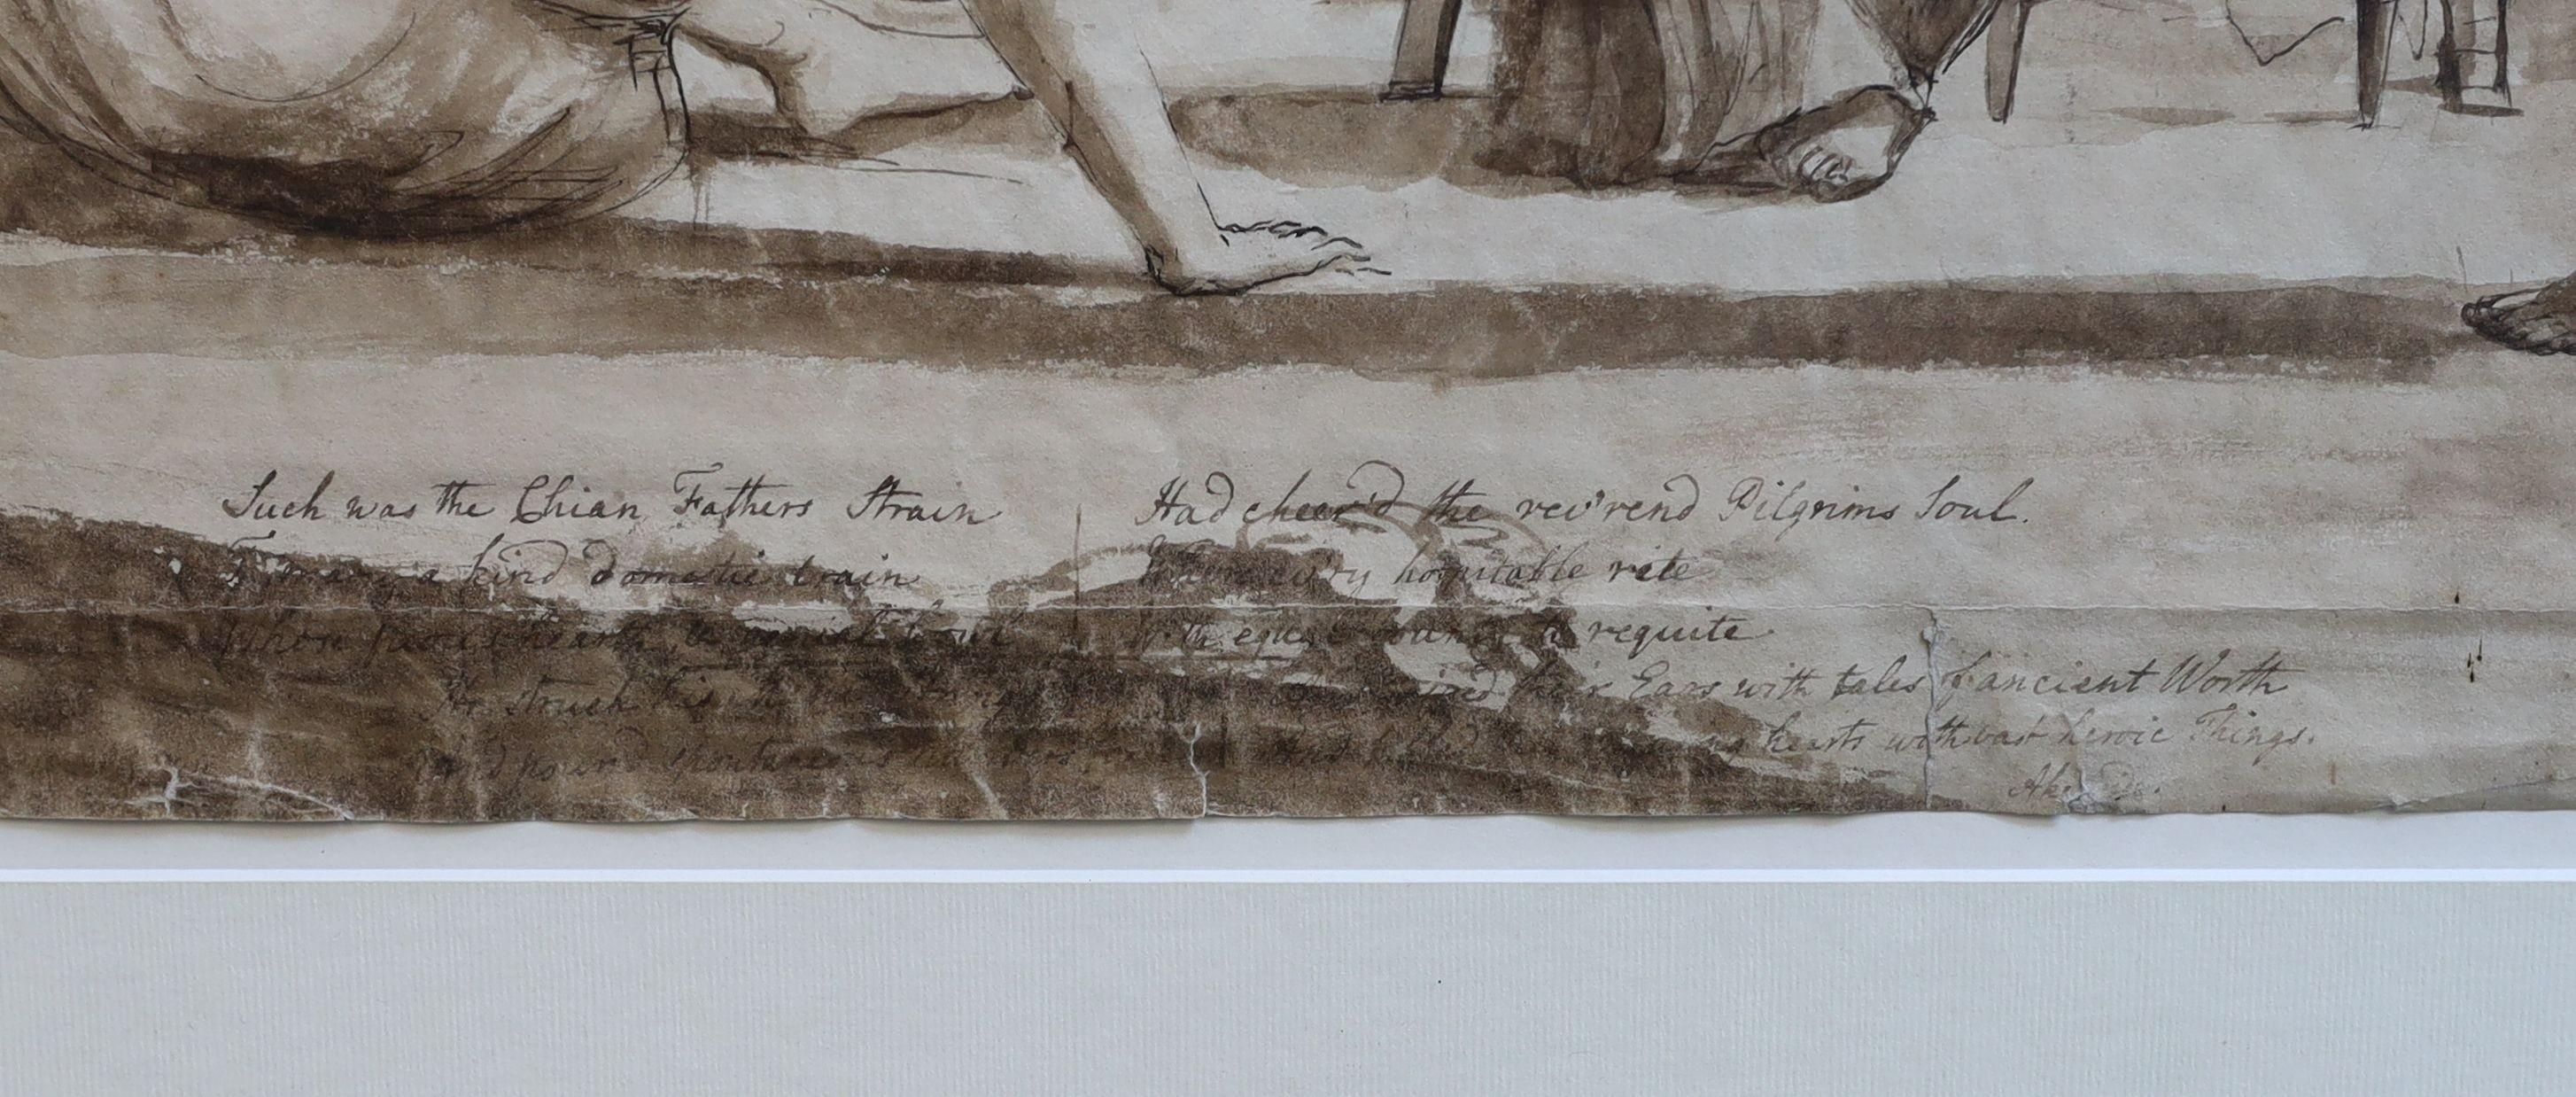 James Barry (1741-1806), 'Such was the Chian Father's strain ...' - Akenside's Poems, ink and wash, 41 x 55cm